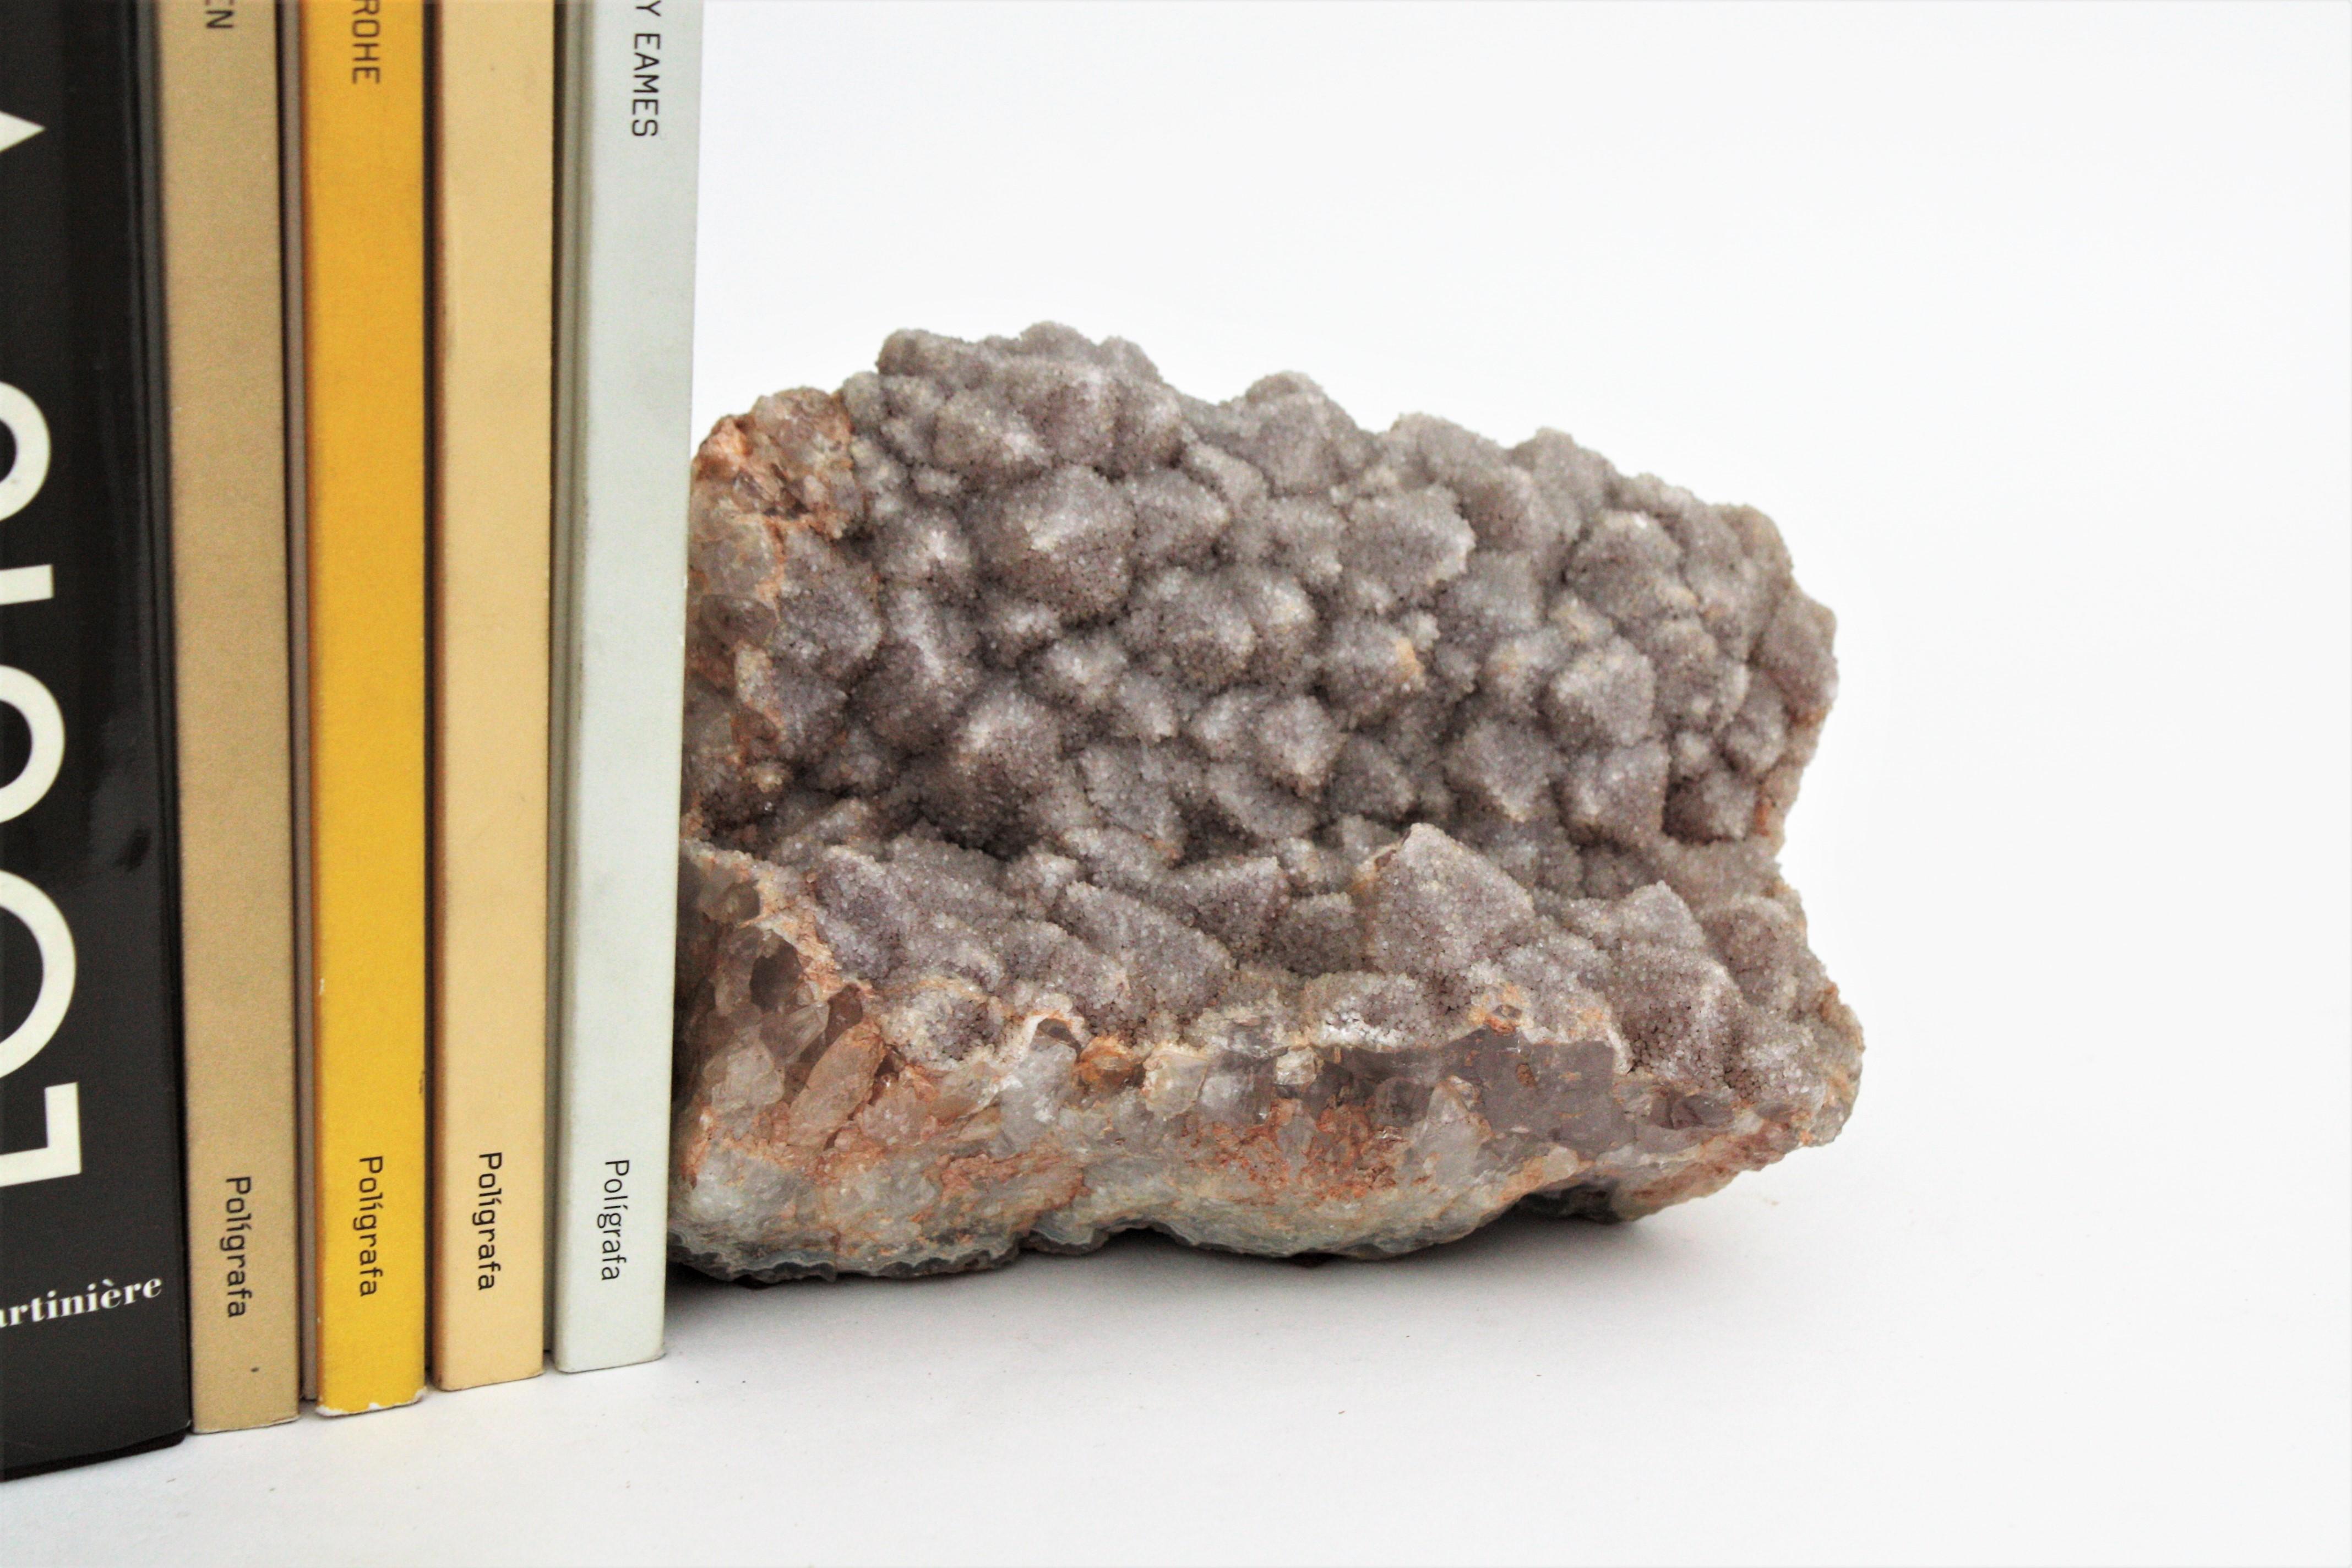 Spanish Unmatching Pair of Quartz & Amethyst Geode Mineral Stone Bookends / Paperweights For Sale